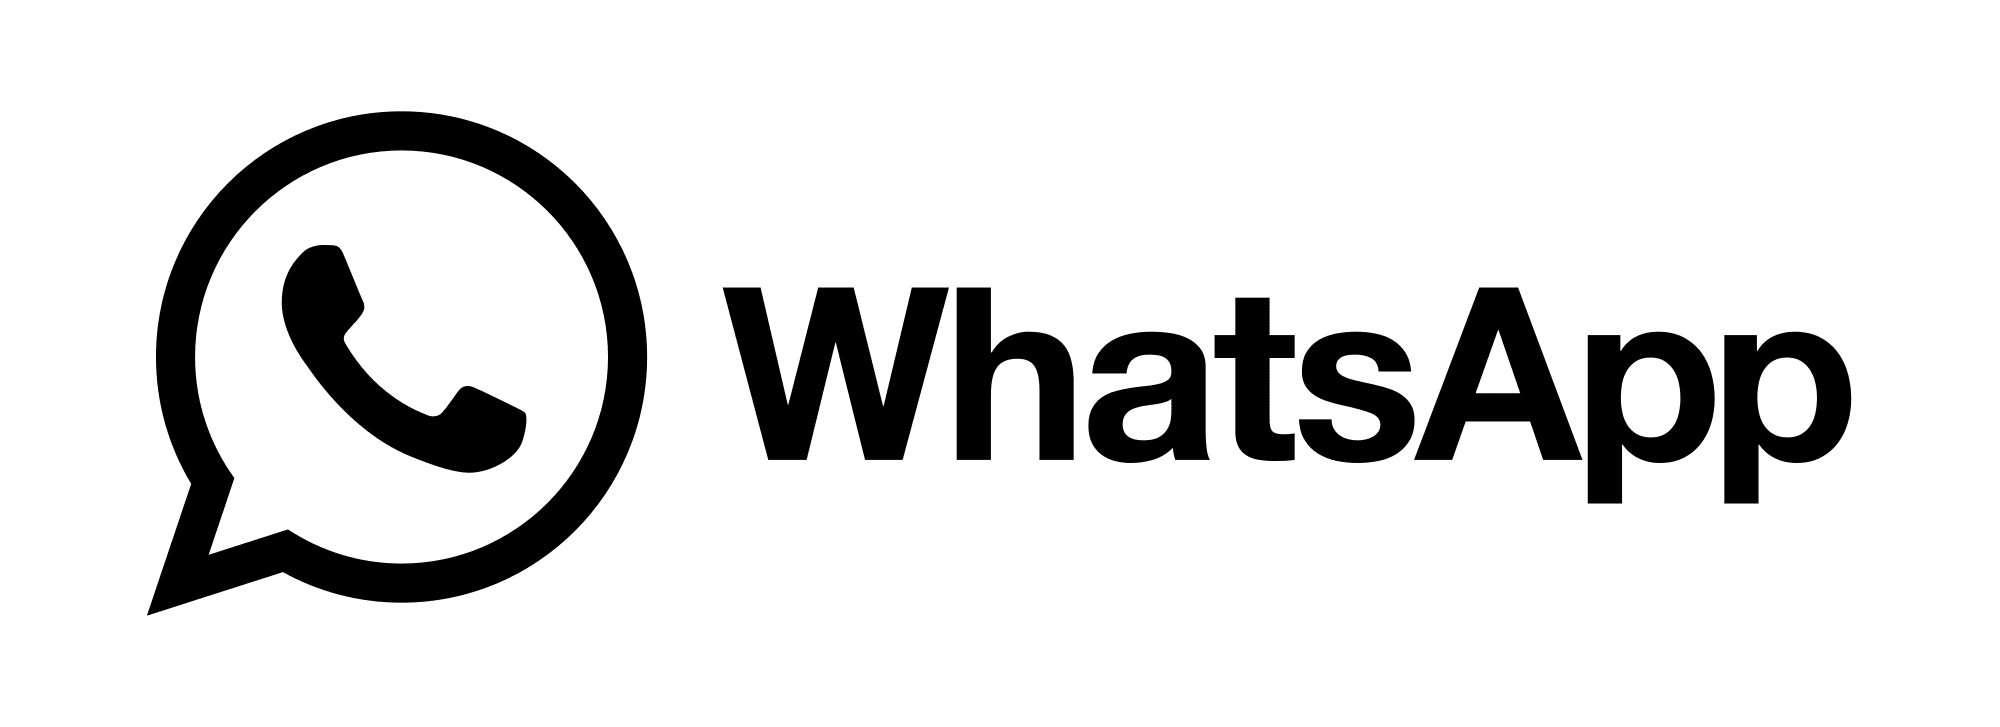 Whatsapp Logo And Brand Transparent Png Stickpng